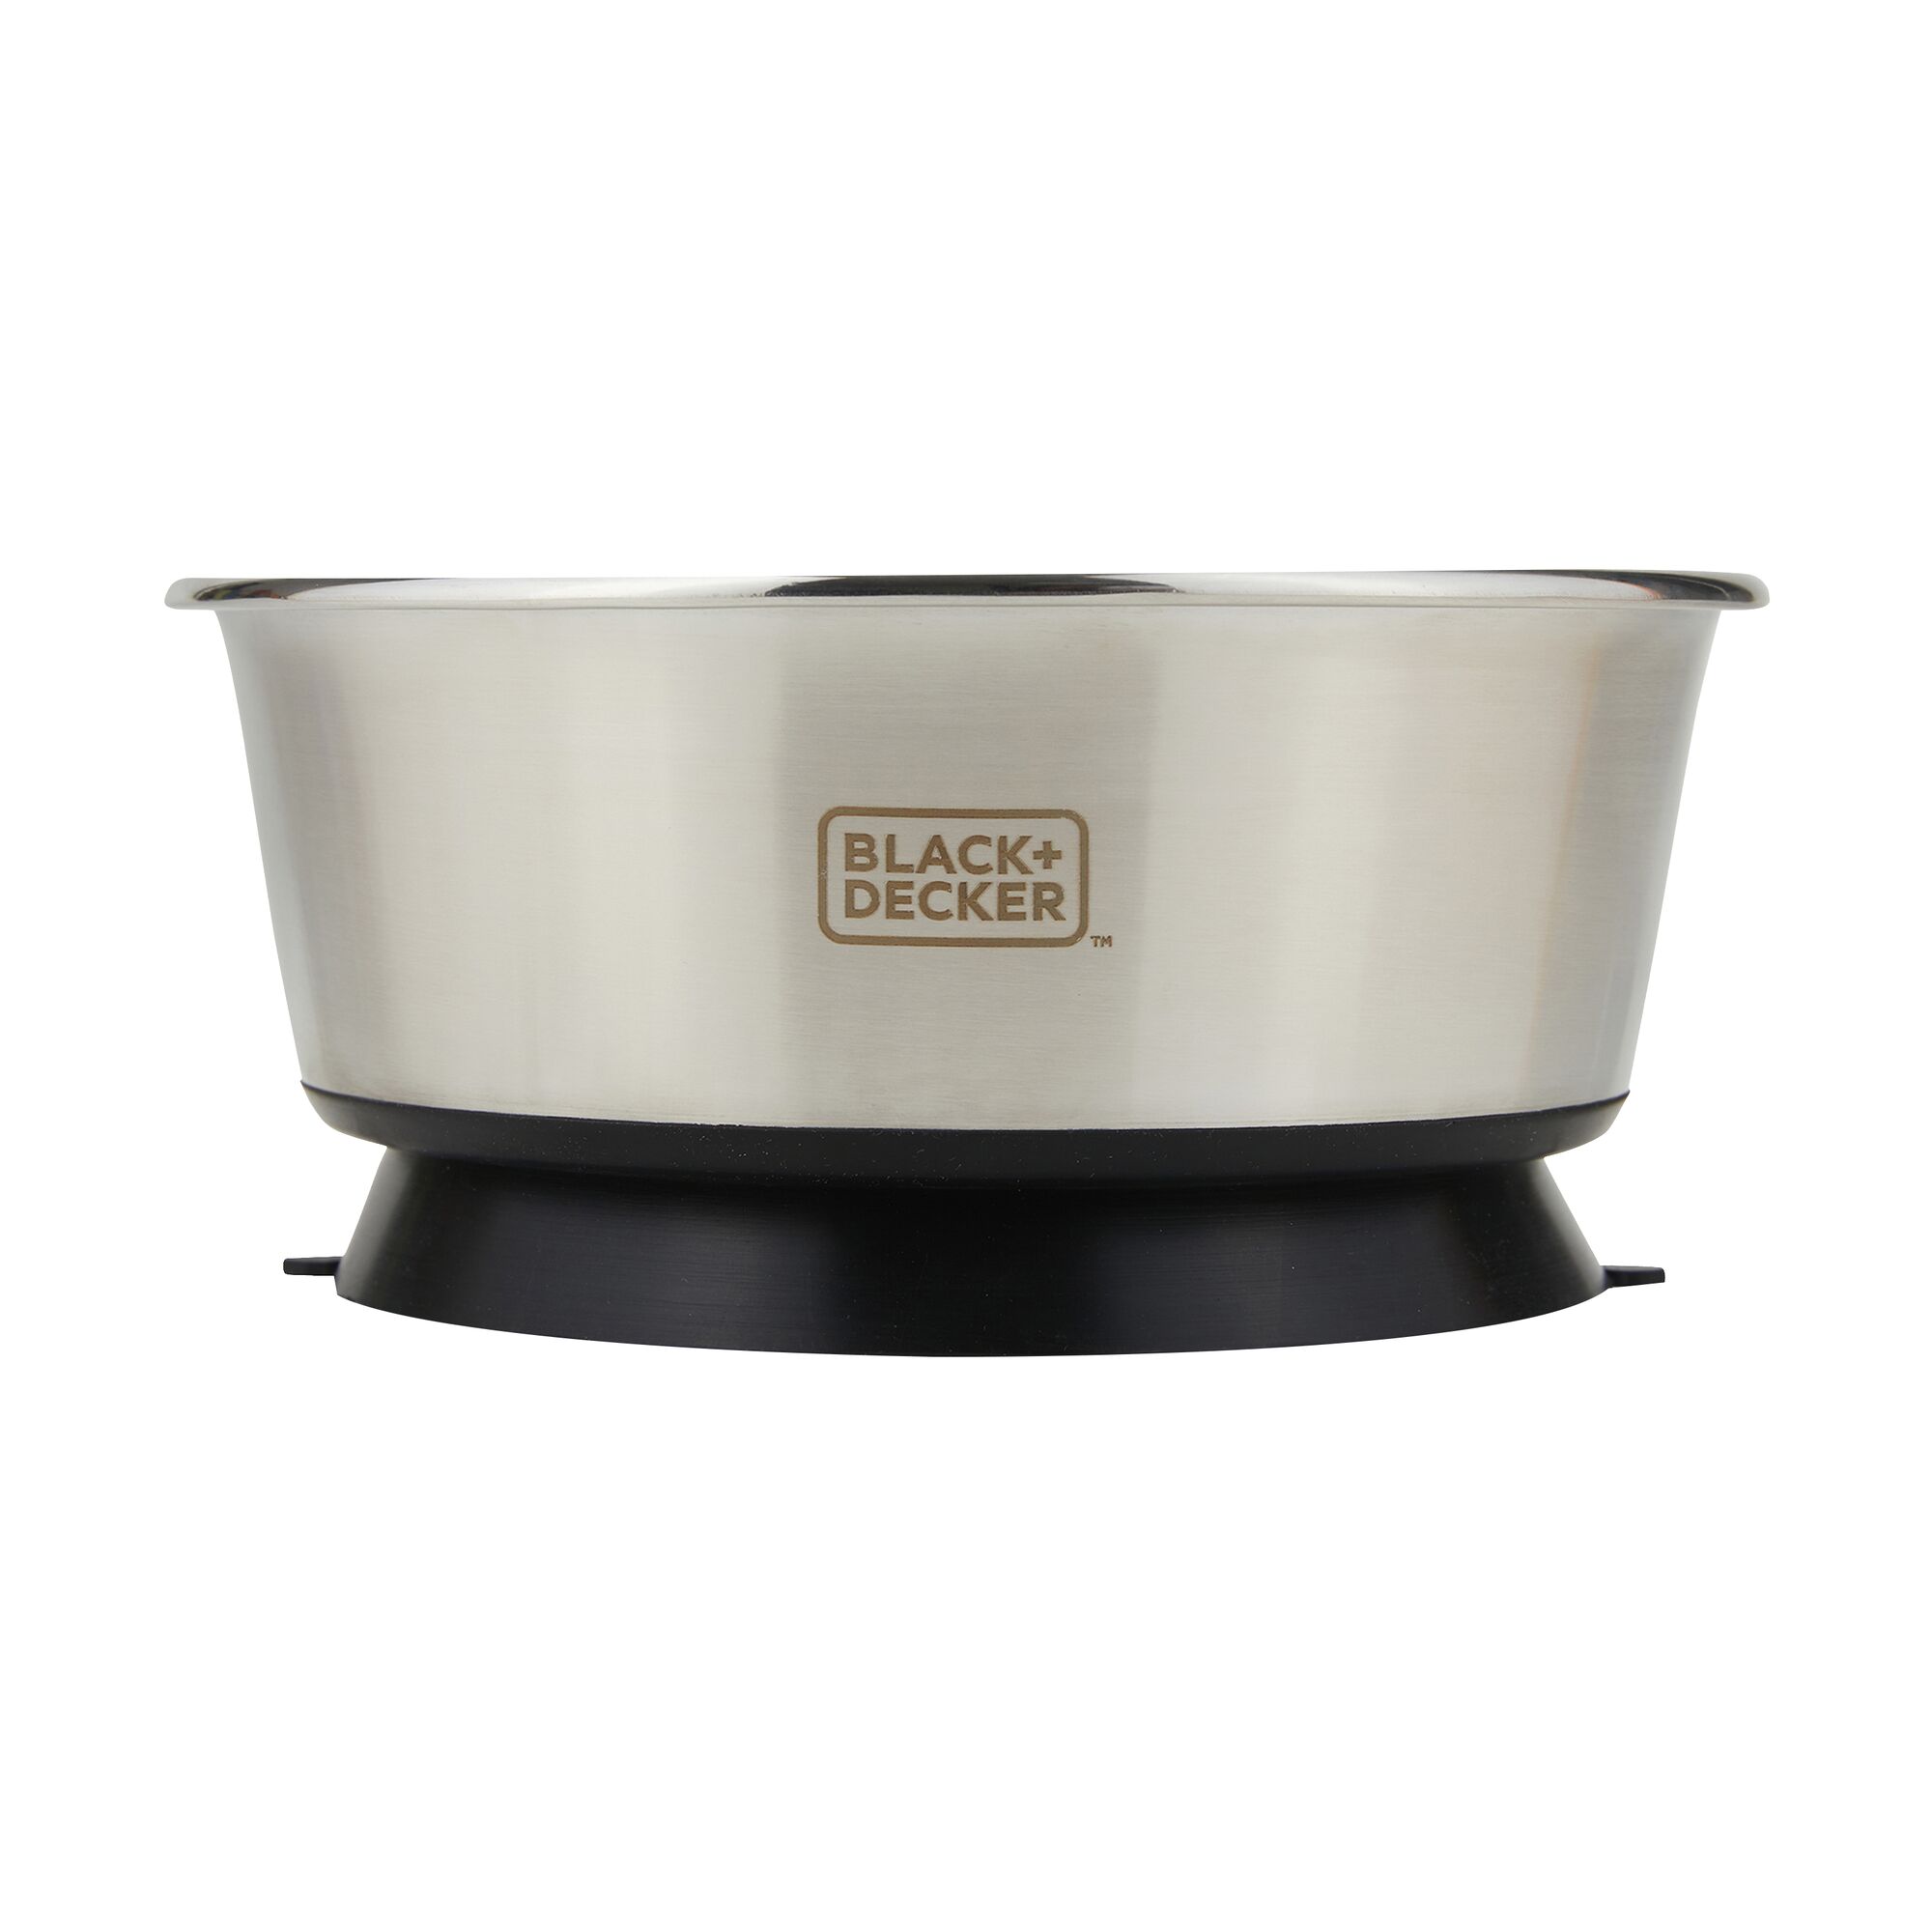 Side profile of the suction cup dog bowl showing BLACK+DECKER logo